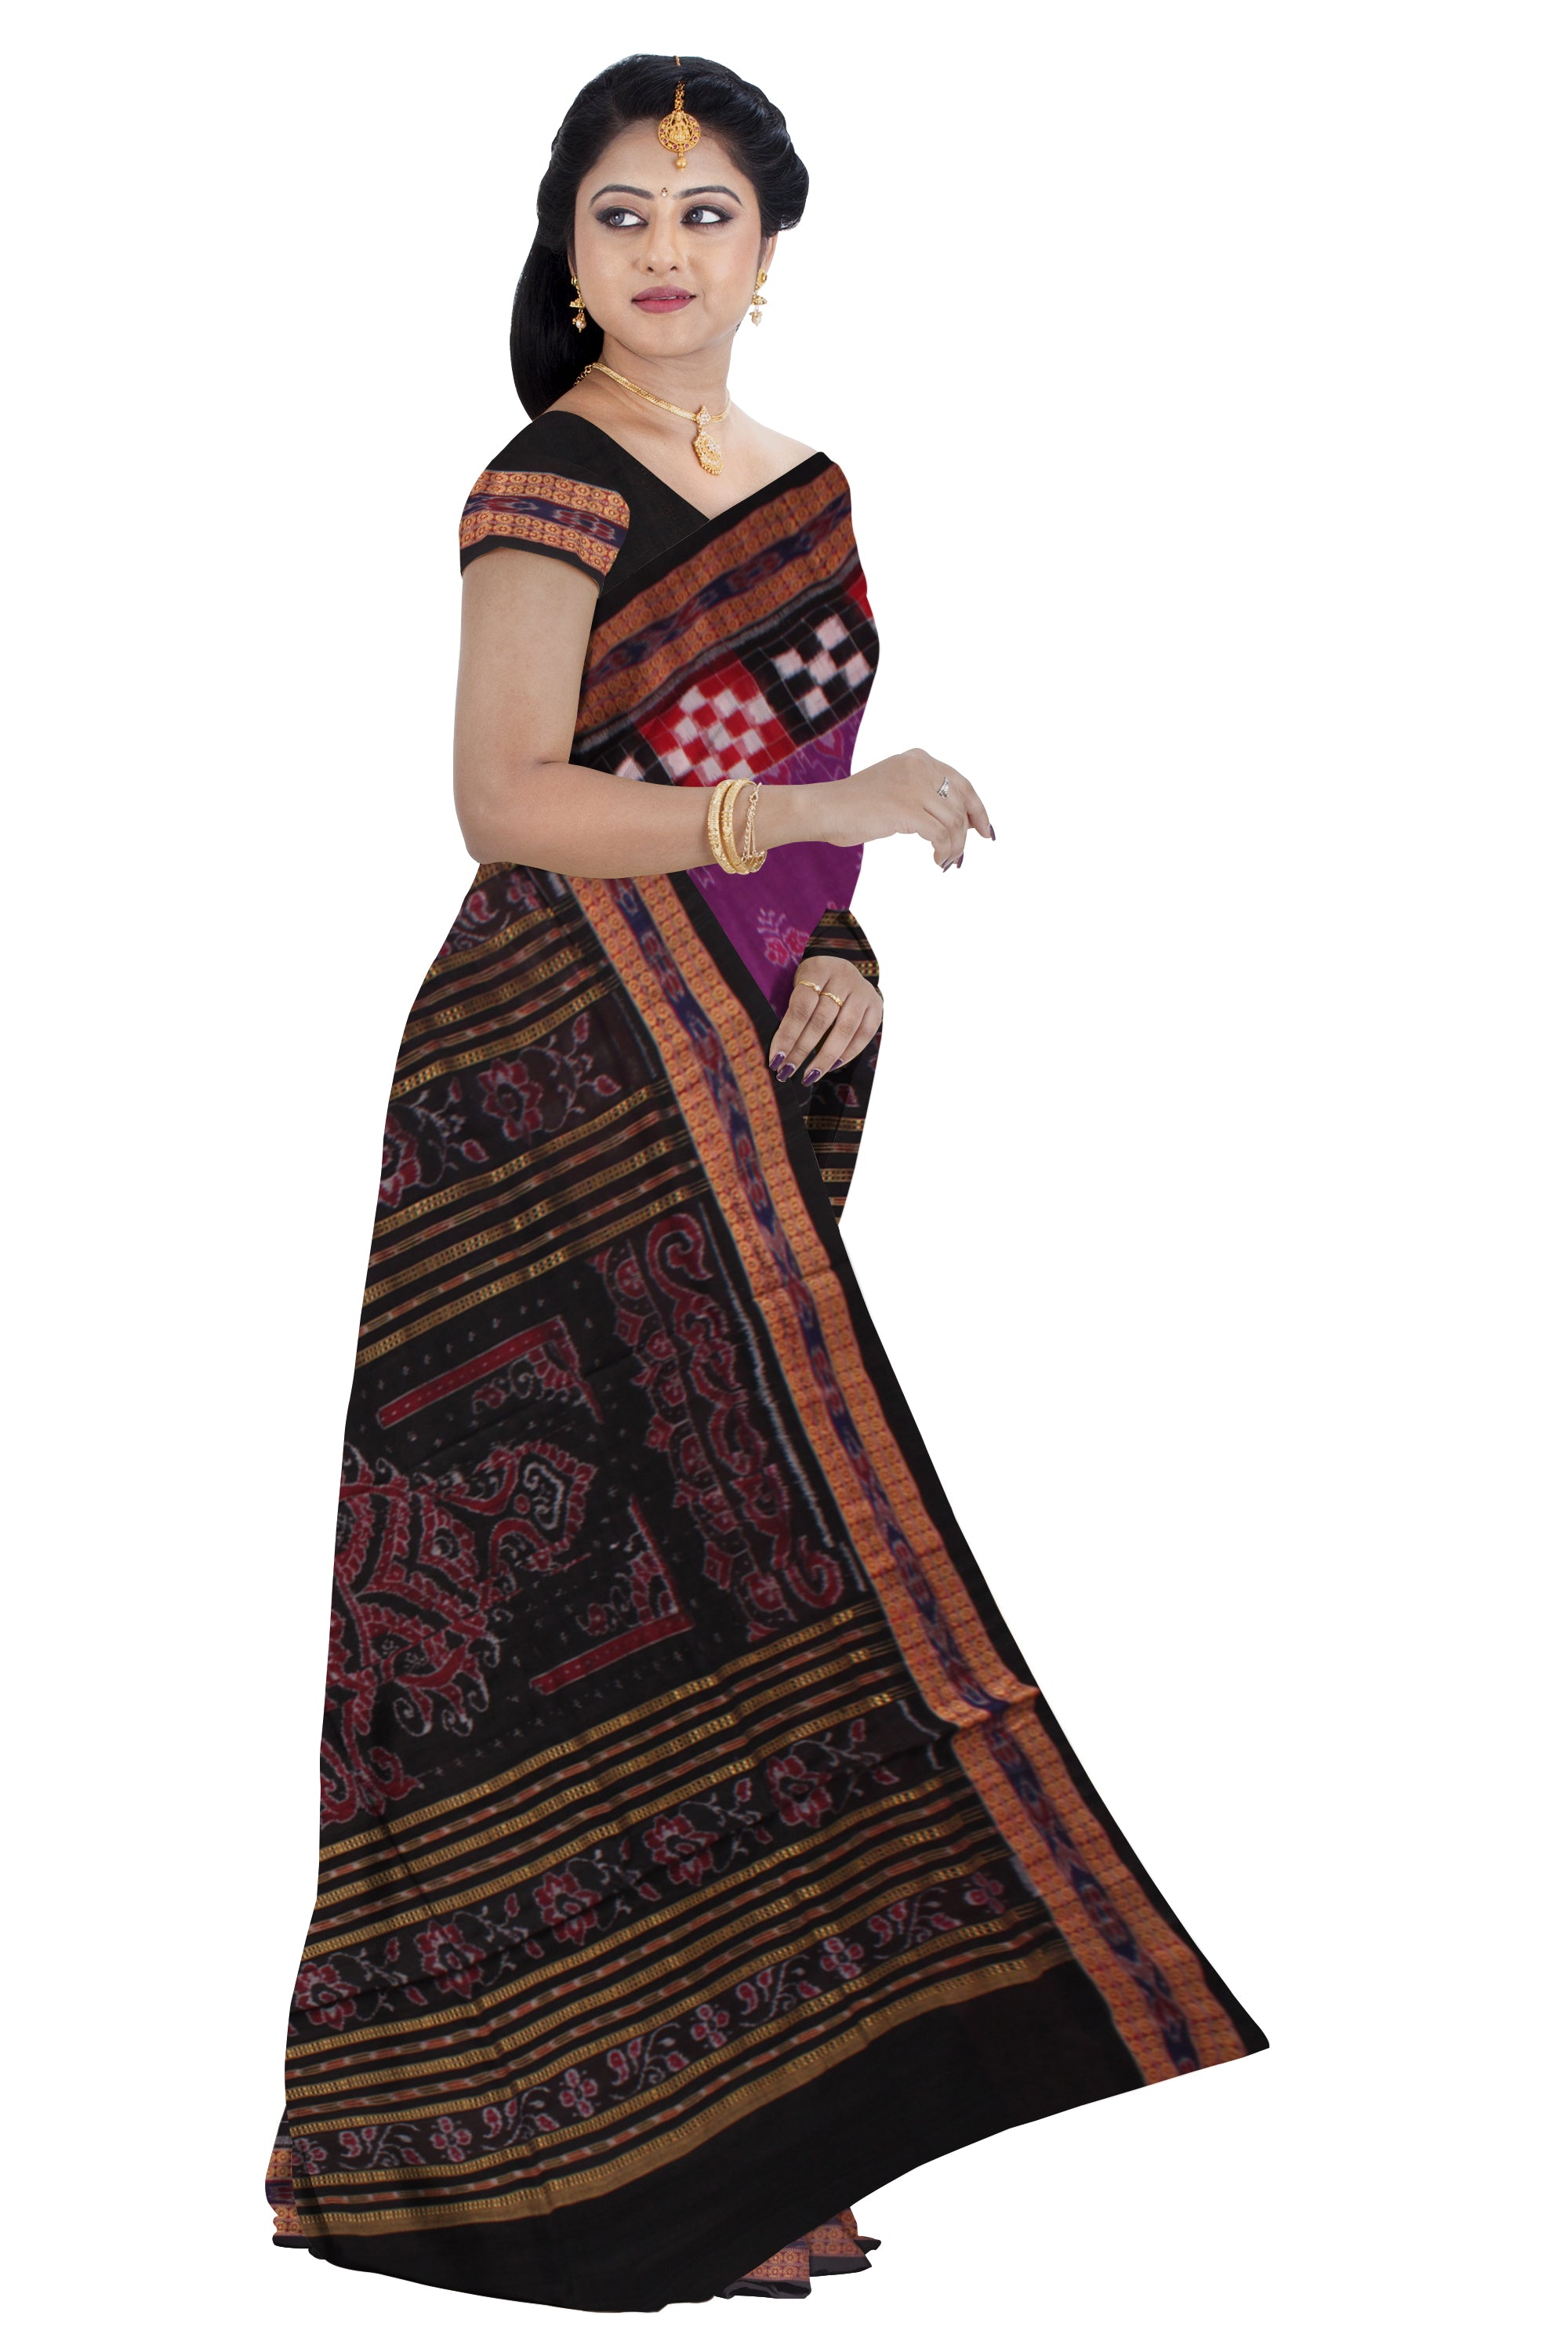 DARK VIOLET AND BLACK COLOR  TRADITIONAL PASAPALI WITH PEACOCK PRINT PURE COTTON SAREE, WITH BLOUSE PIECE. - Koshali Arts & Crafts Enterprise